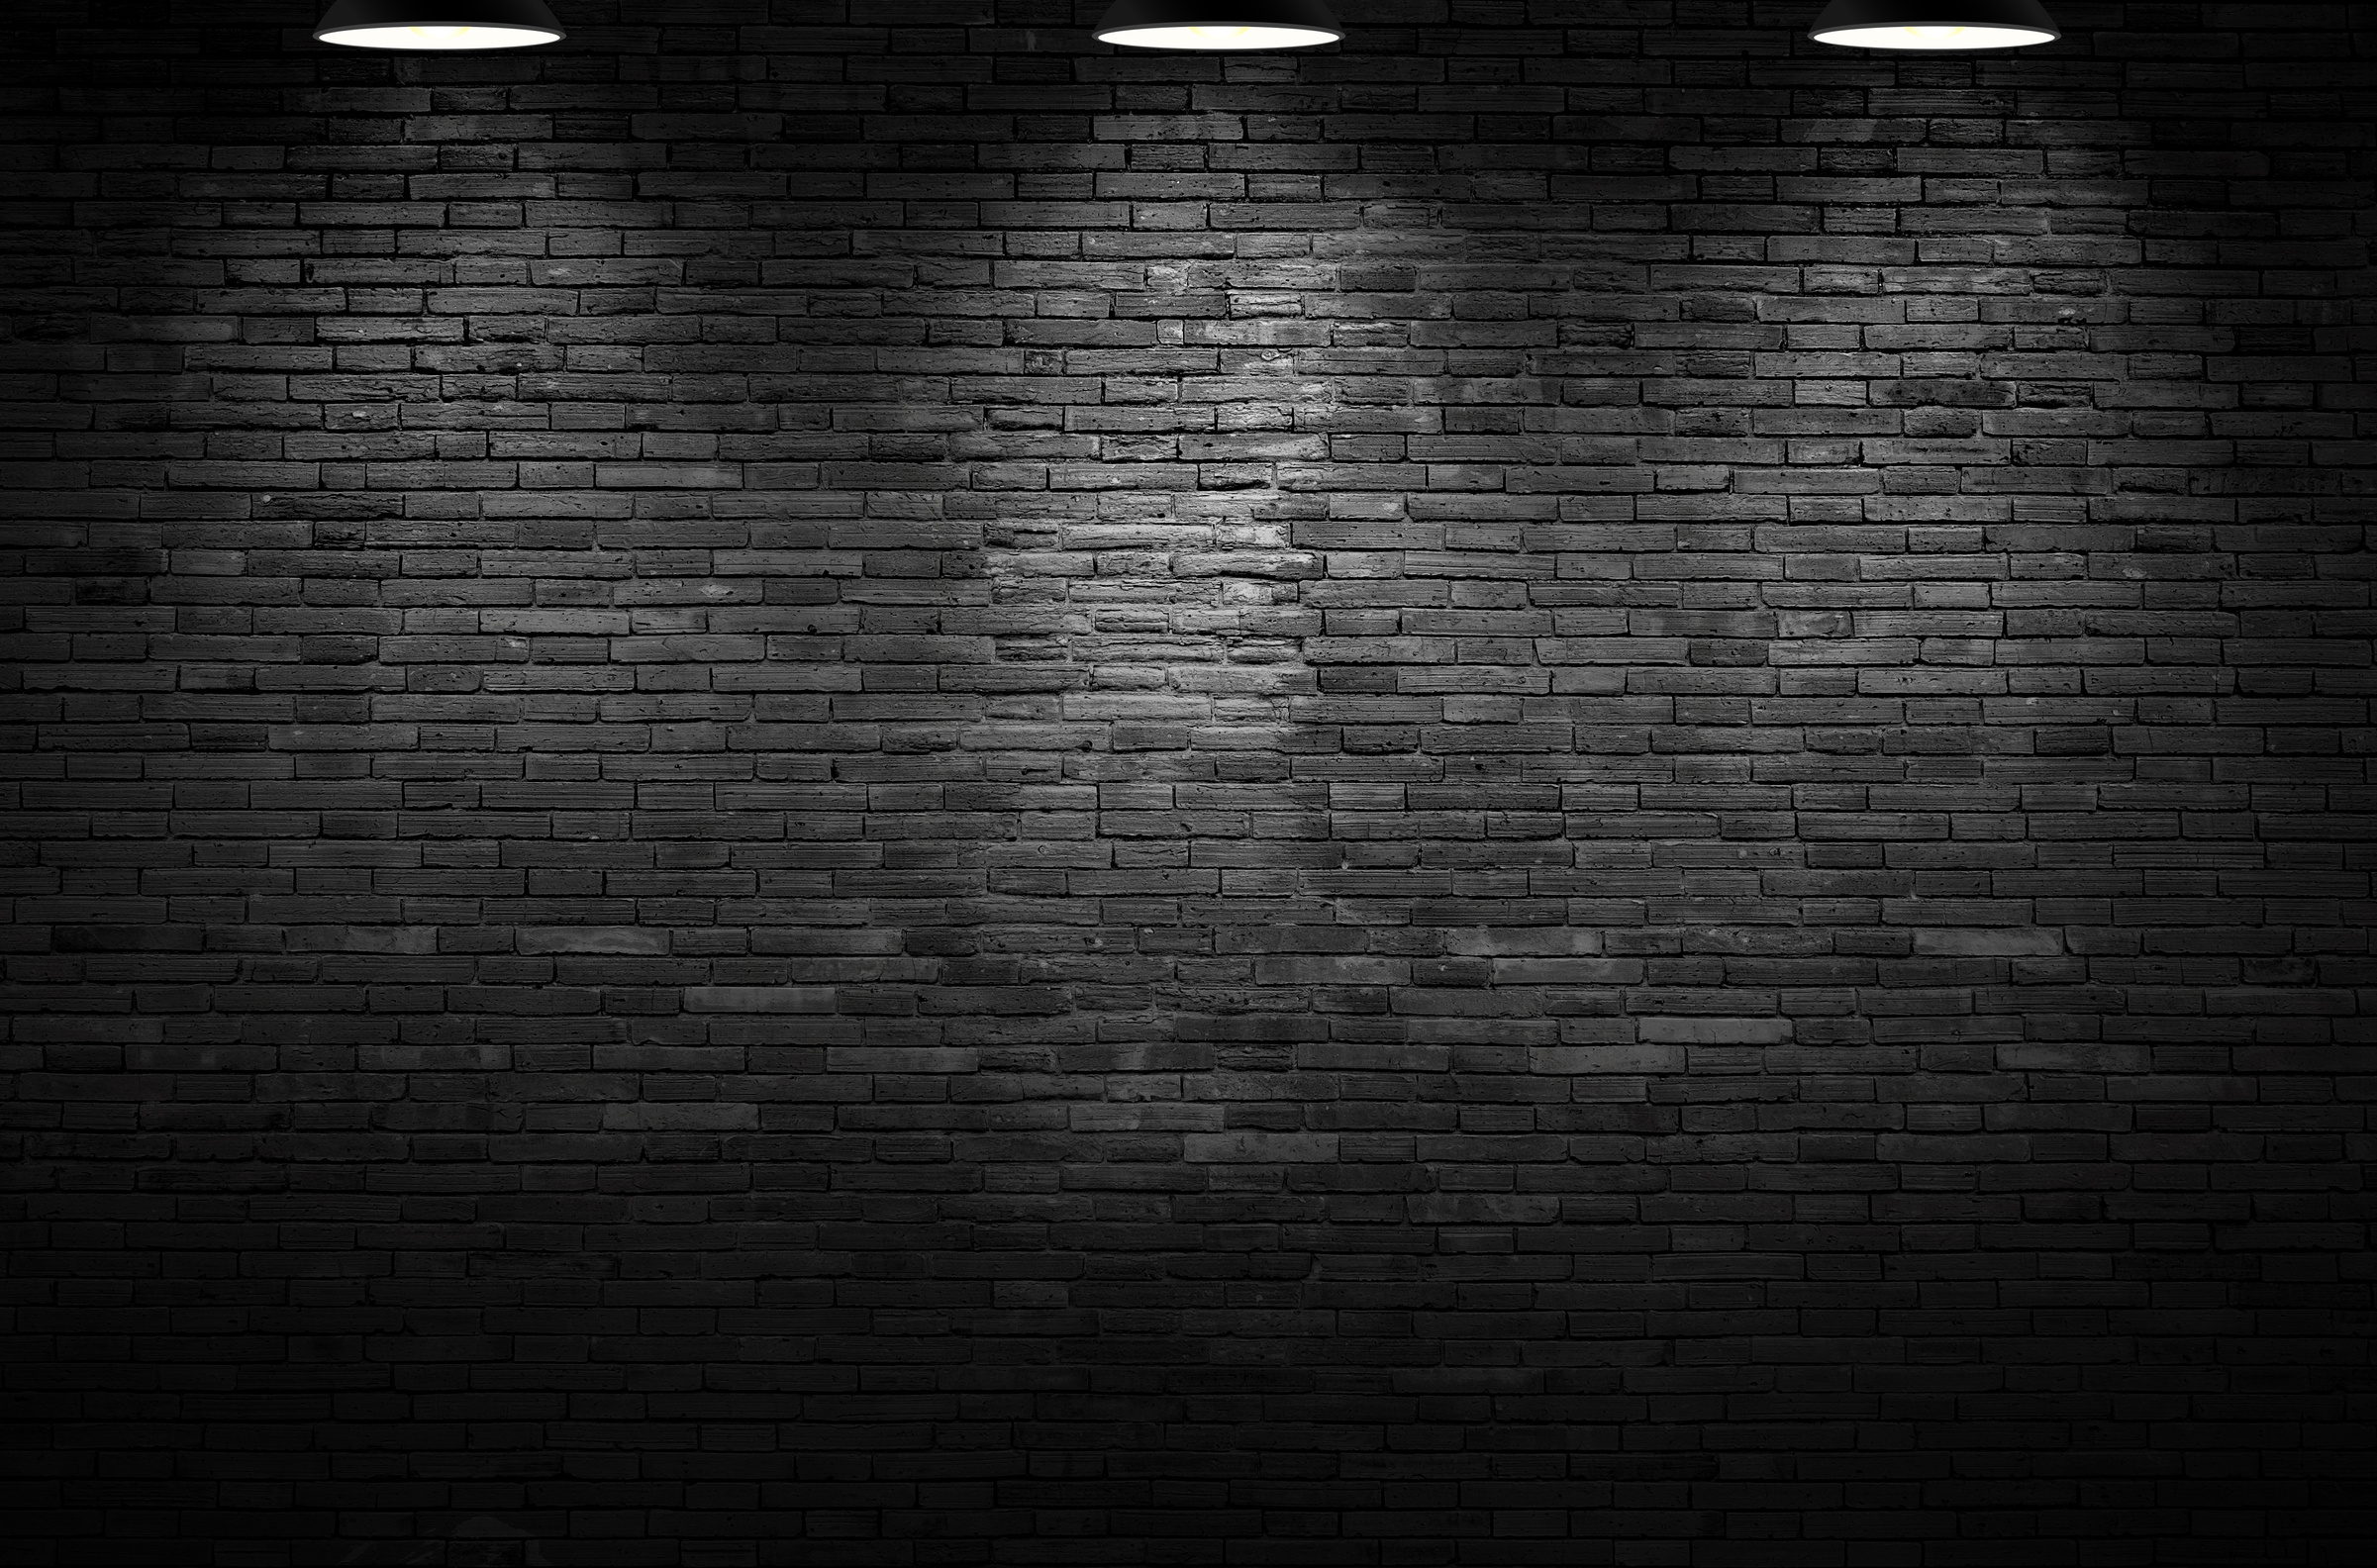 Black Brick Wall Room Background with Lights